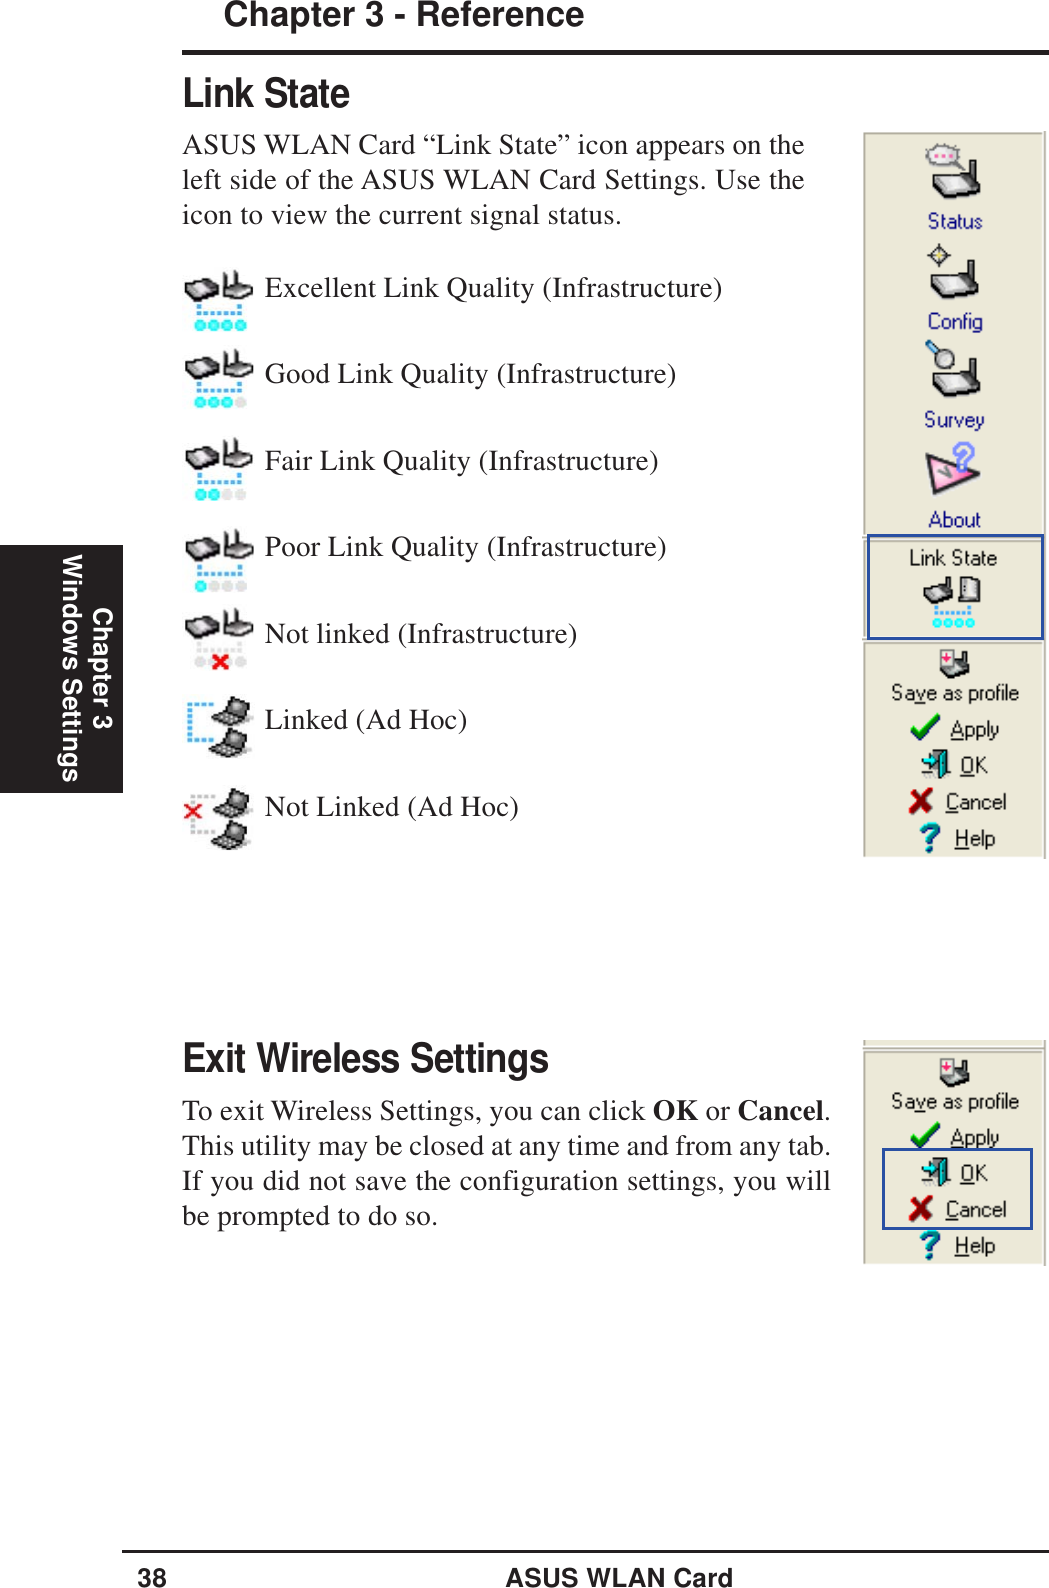 38 ASUS WLAN CardChapter 3 - ReferenceChapter 3Windows SettingsLink StateASUS WLAN Card “Link State” icon appears on theleft side of the ASUS WLAN Card Settings. Use theicon to view the current signal status.Exit Wireless SettingsTo exit Wireless Settings, you can click OK or Cancel.This utility may be closed at any time and from any tab.If you did not save the configuration settings, you willbe prompted to do so.Excellent Link Quality (Infrastructure)Good Link Quality (Infrastructure)Fair Link Quality (Infrastructure)Poor Link Quality (Infrastructure)Not linked (Infrastructure)Linked (Ad Hoc)Not Linked (Ad Hoc)